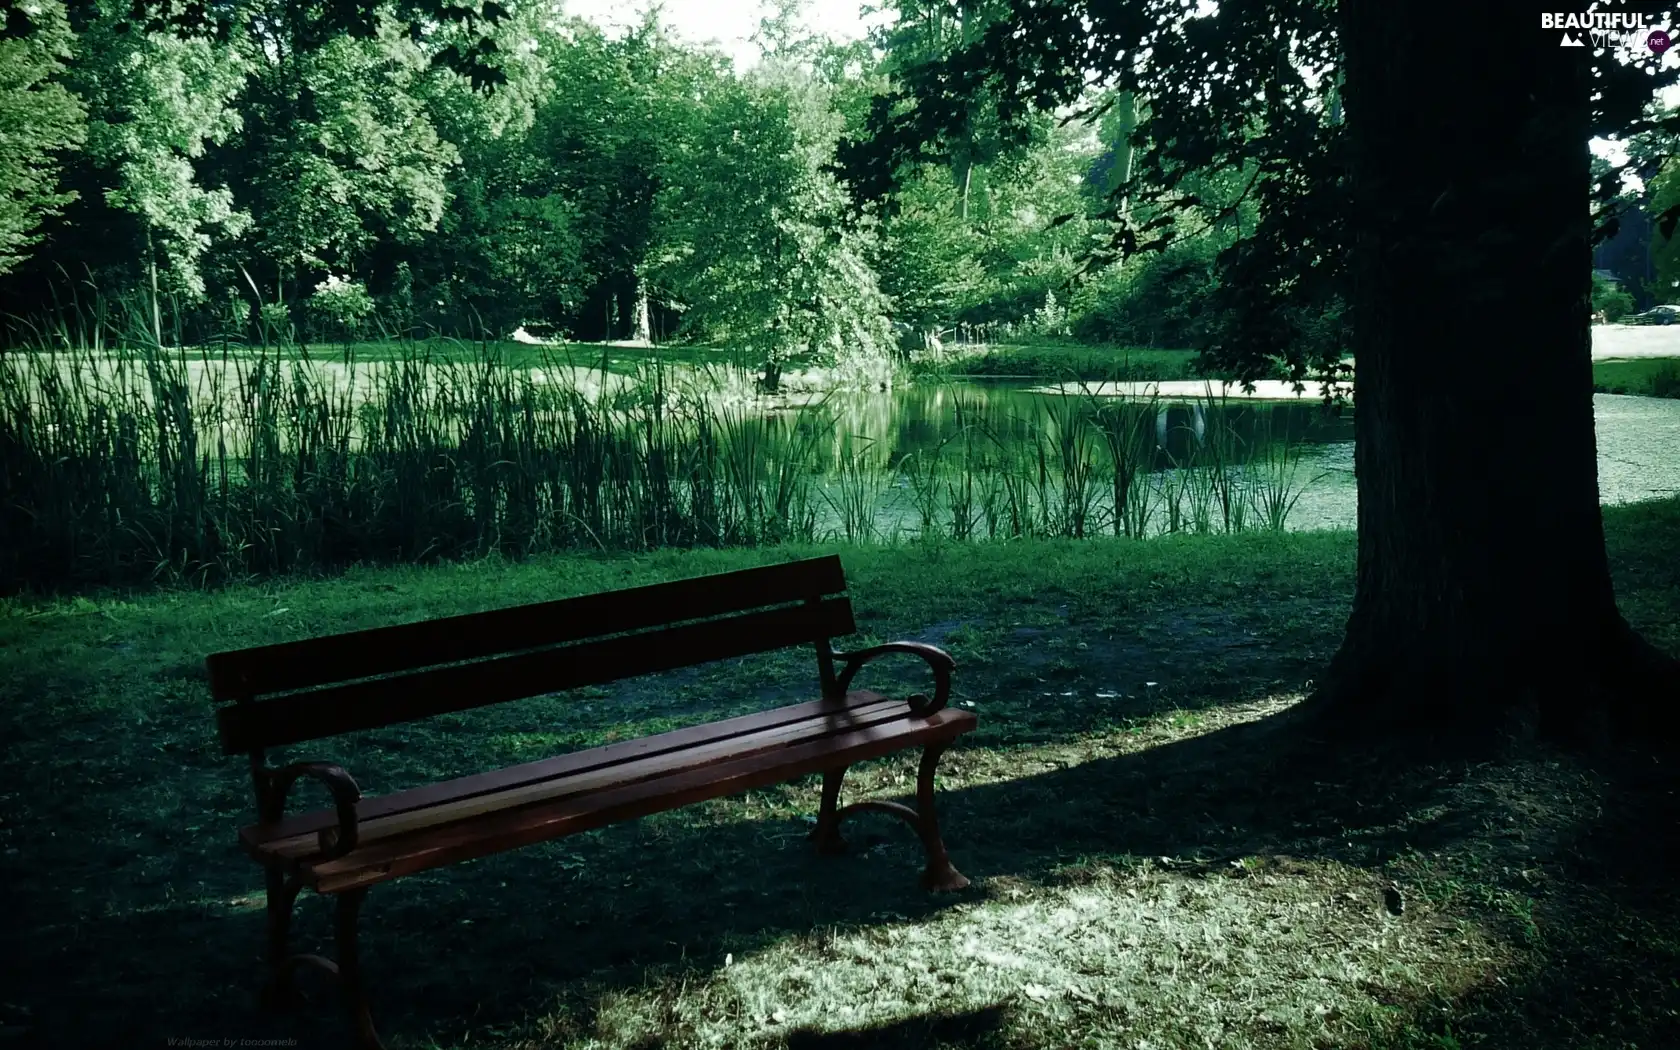 trees, viewes, Bench, Pond - car, Park